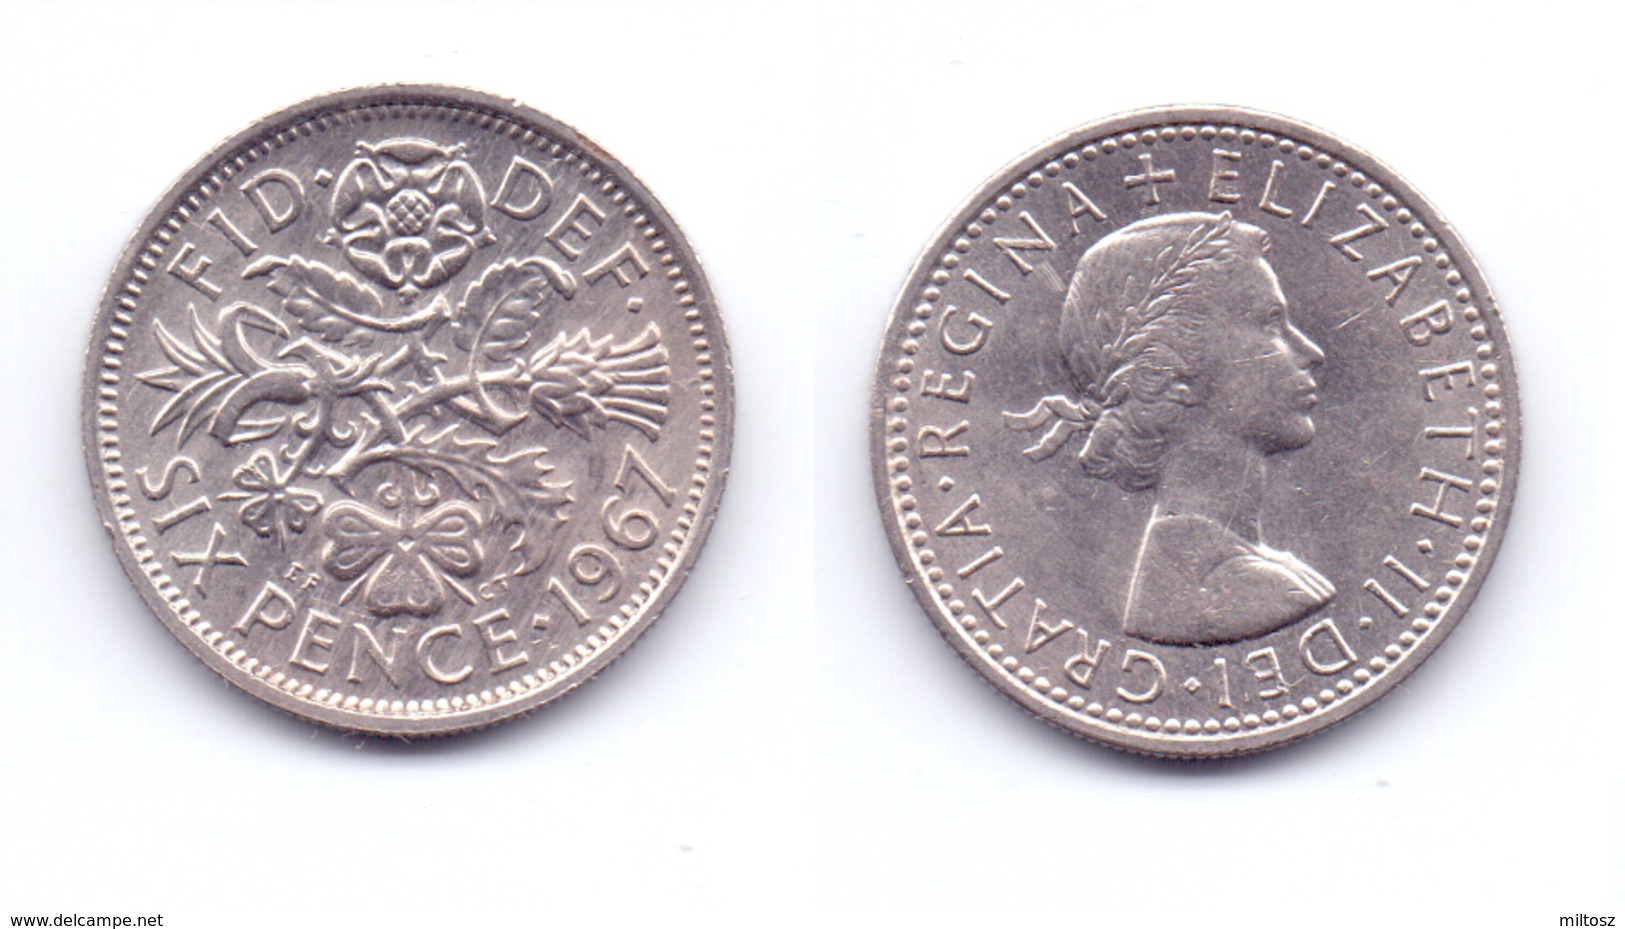 Great Britain 6 Pence 1967 - H. 6 Pence